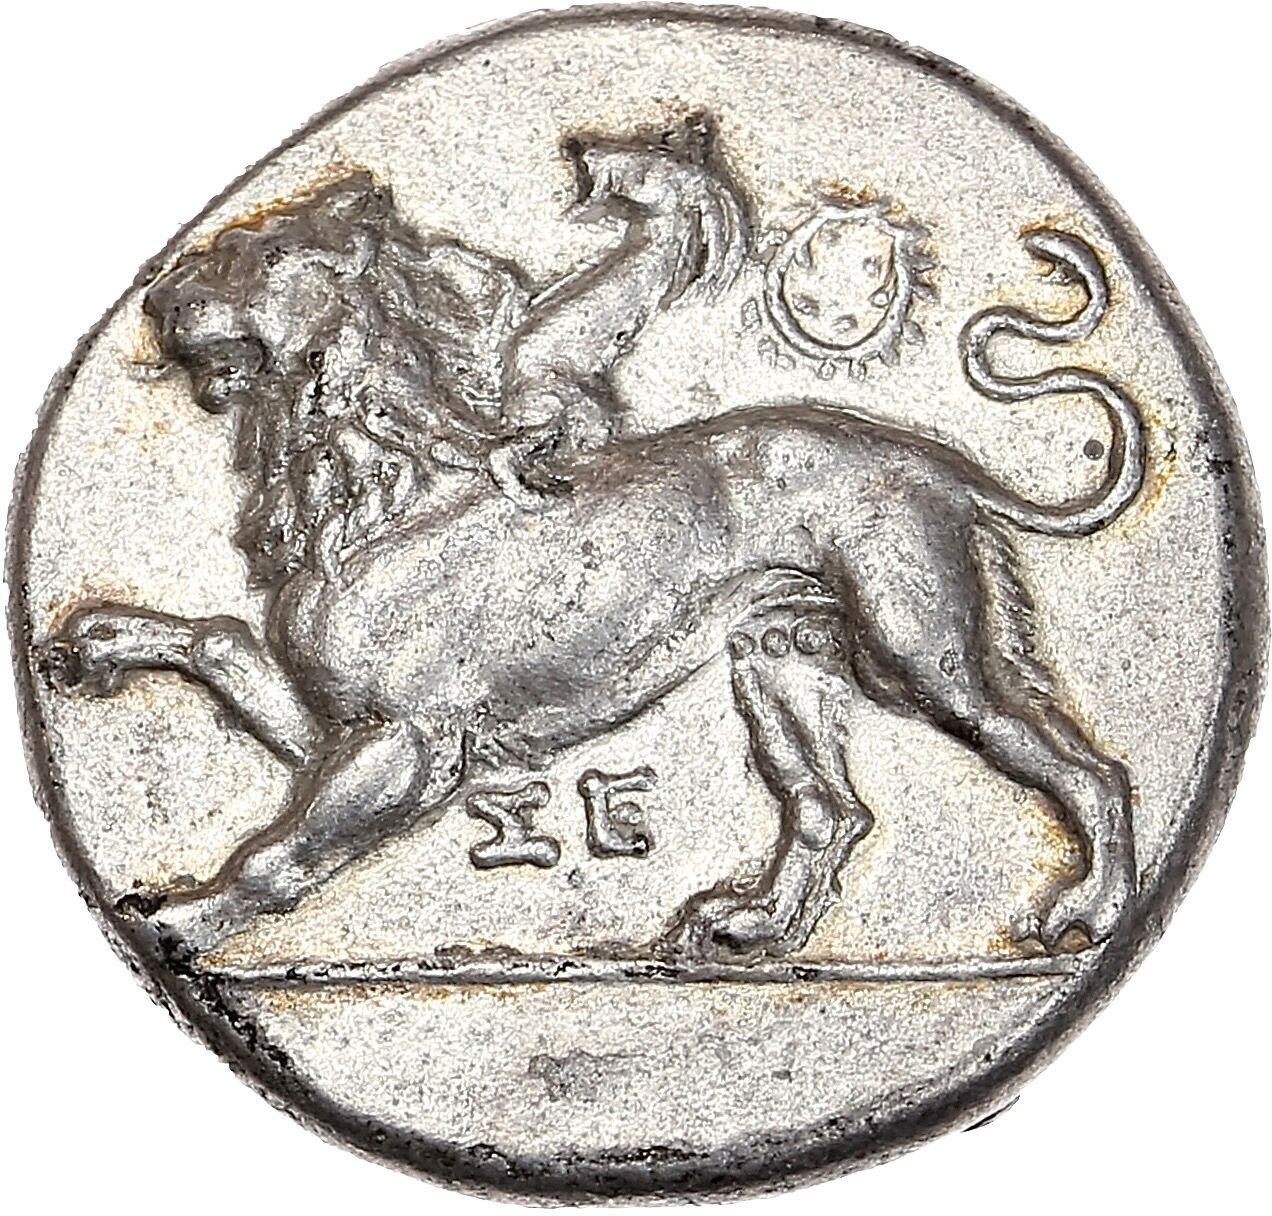 Null PÉLOPONÈSE
Sycione (360-320 BC)
Statere. 11,91 g.
Chimera walking left. Abo&hellip;